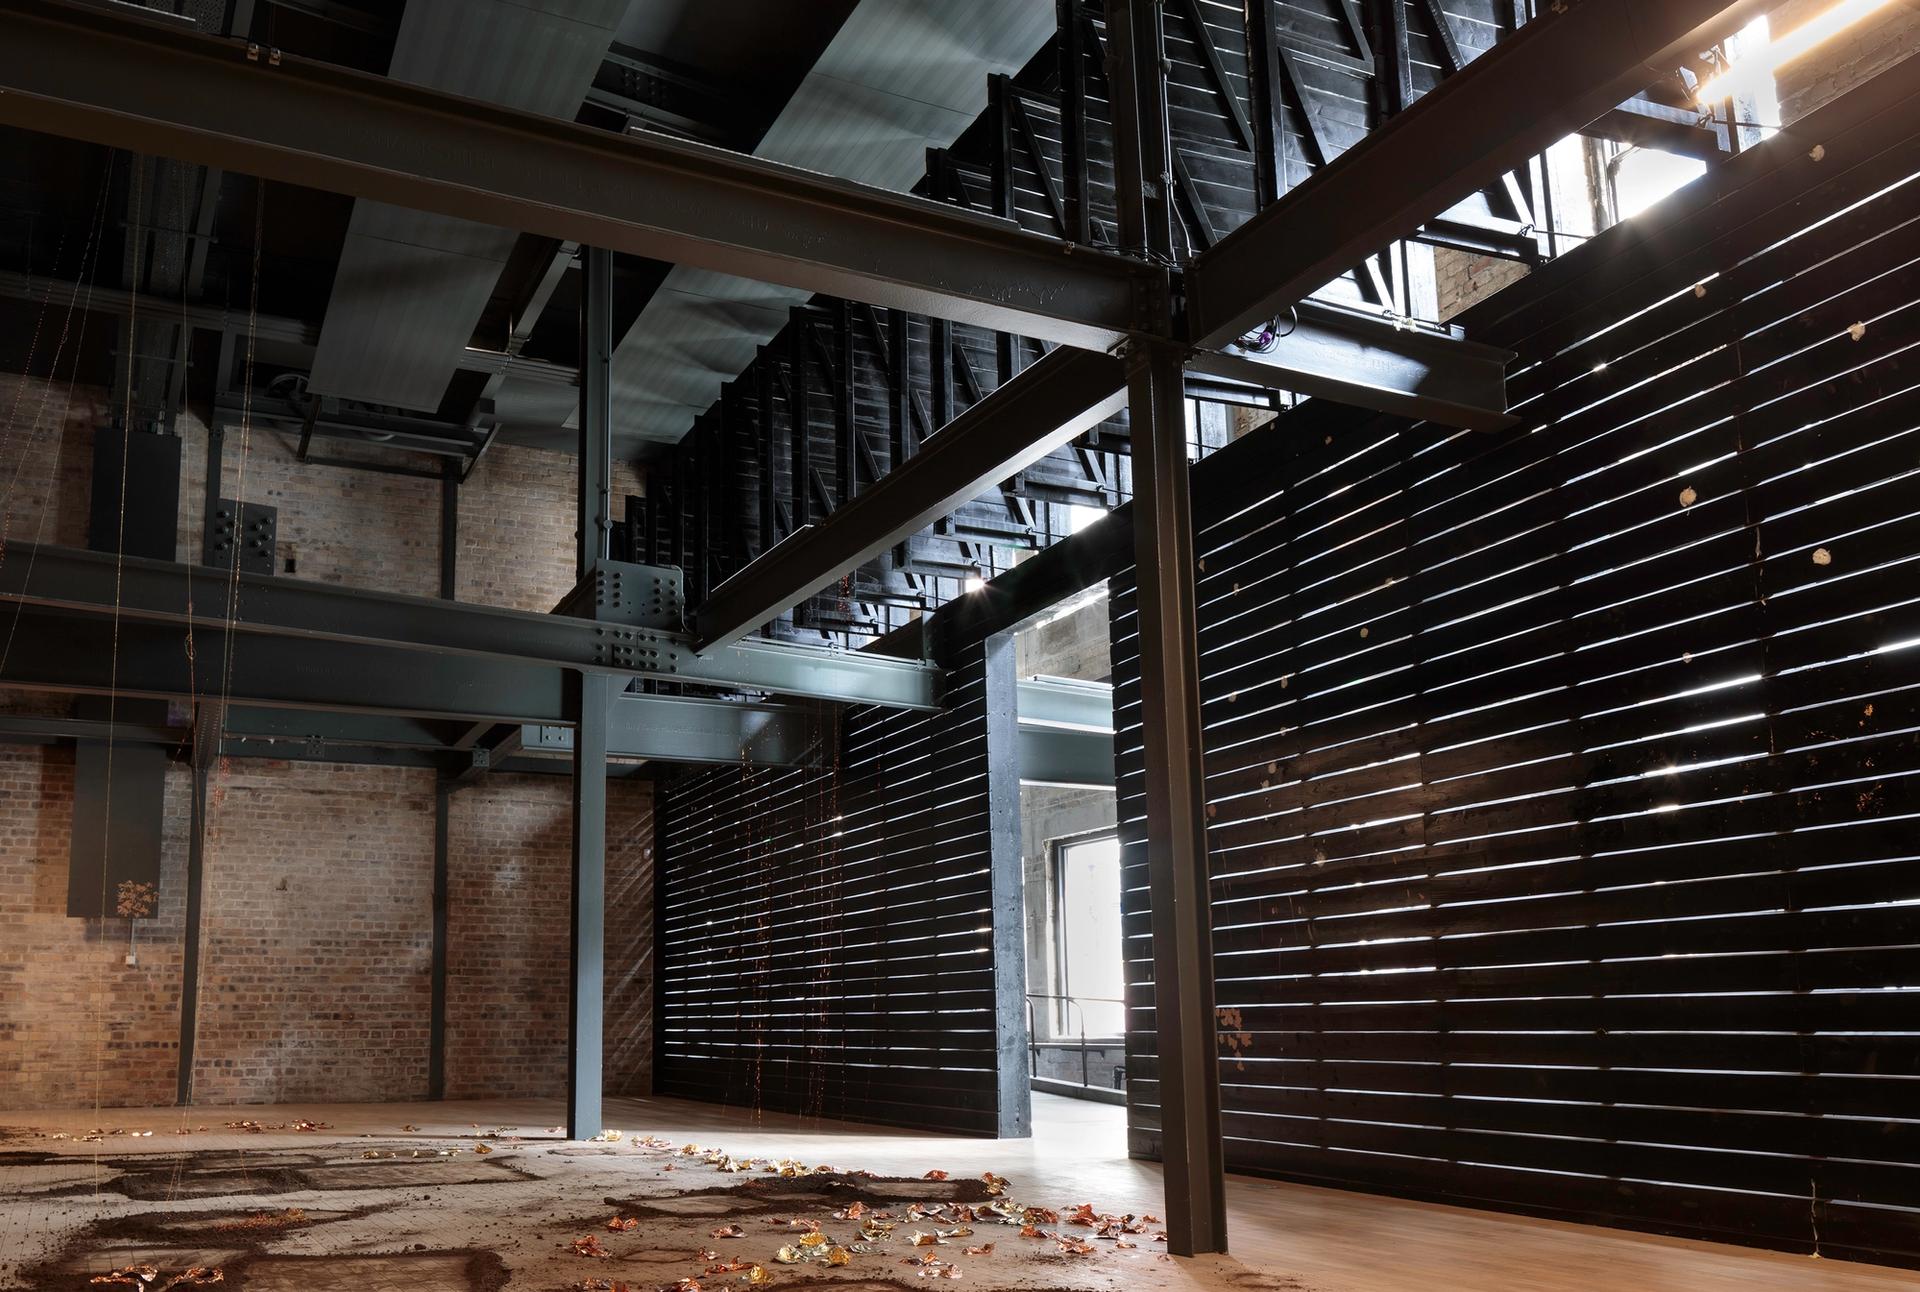 Fruitmarket gallery's new double-height warehouse space will host performance and installation work Photo: Ruth Clark